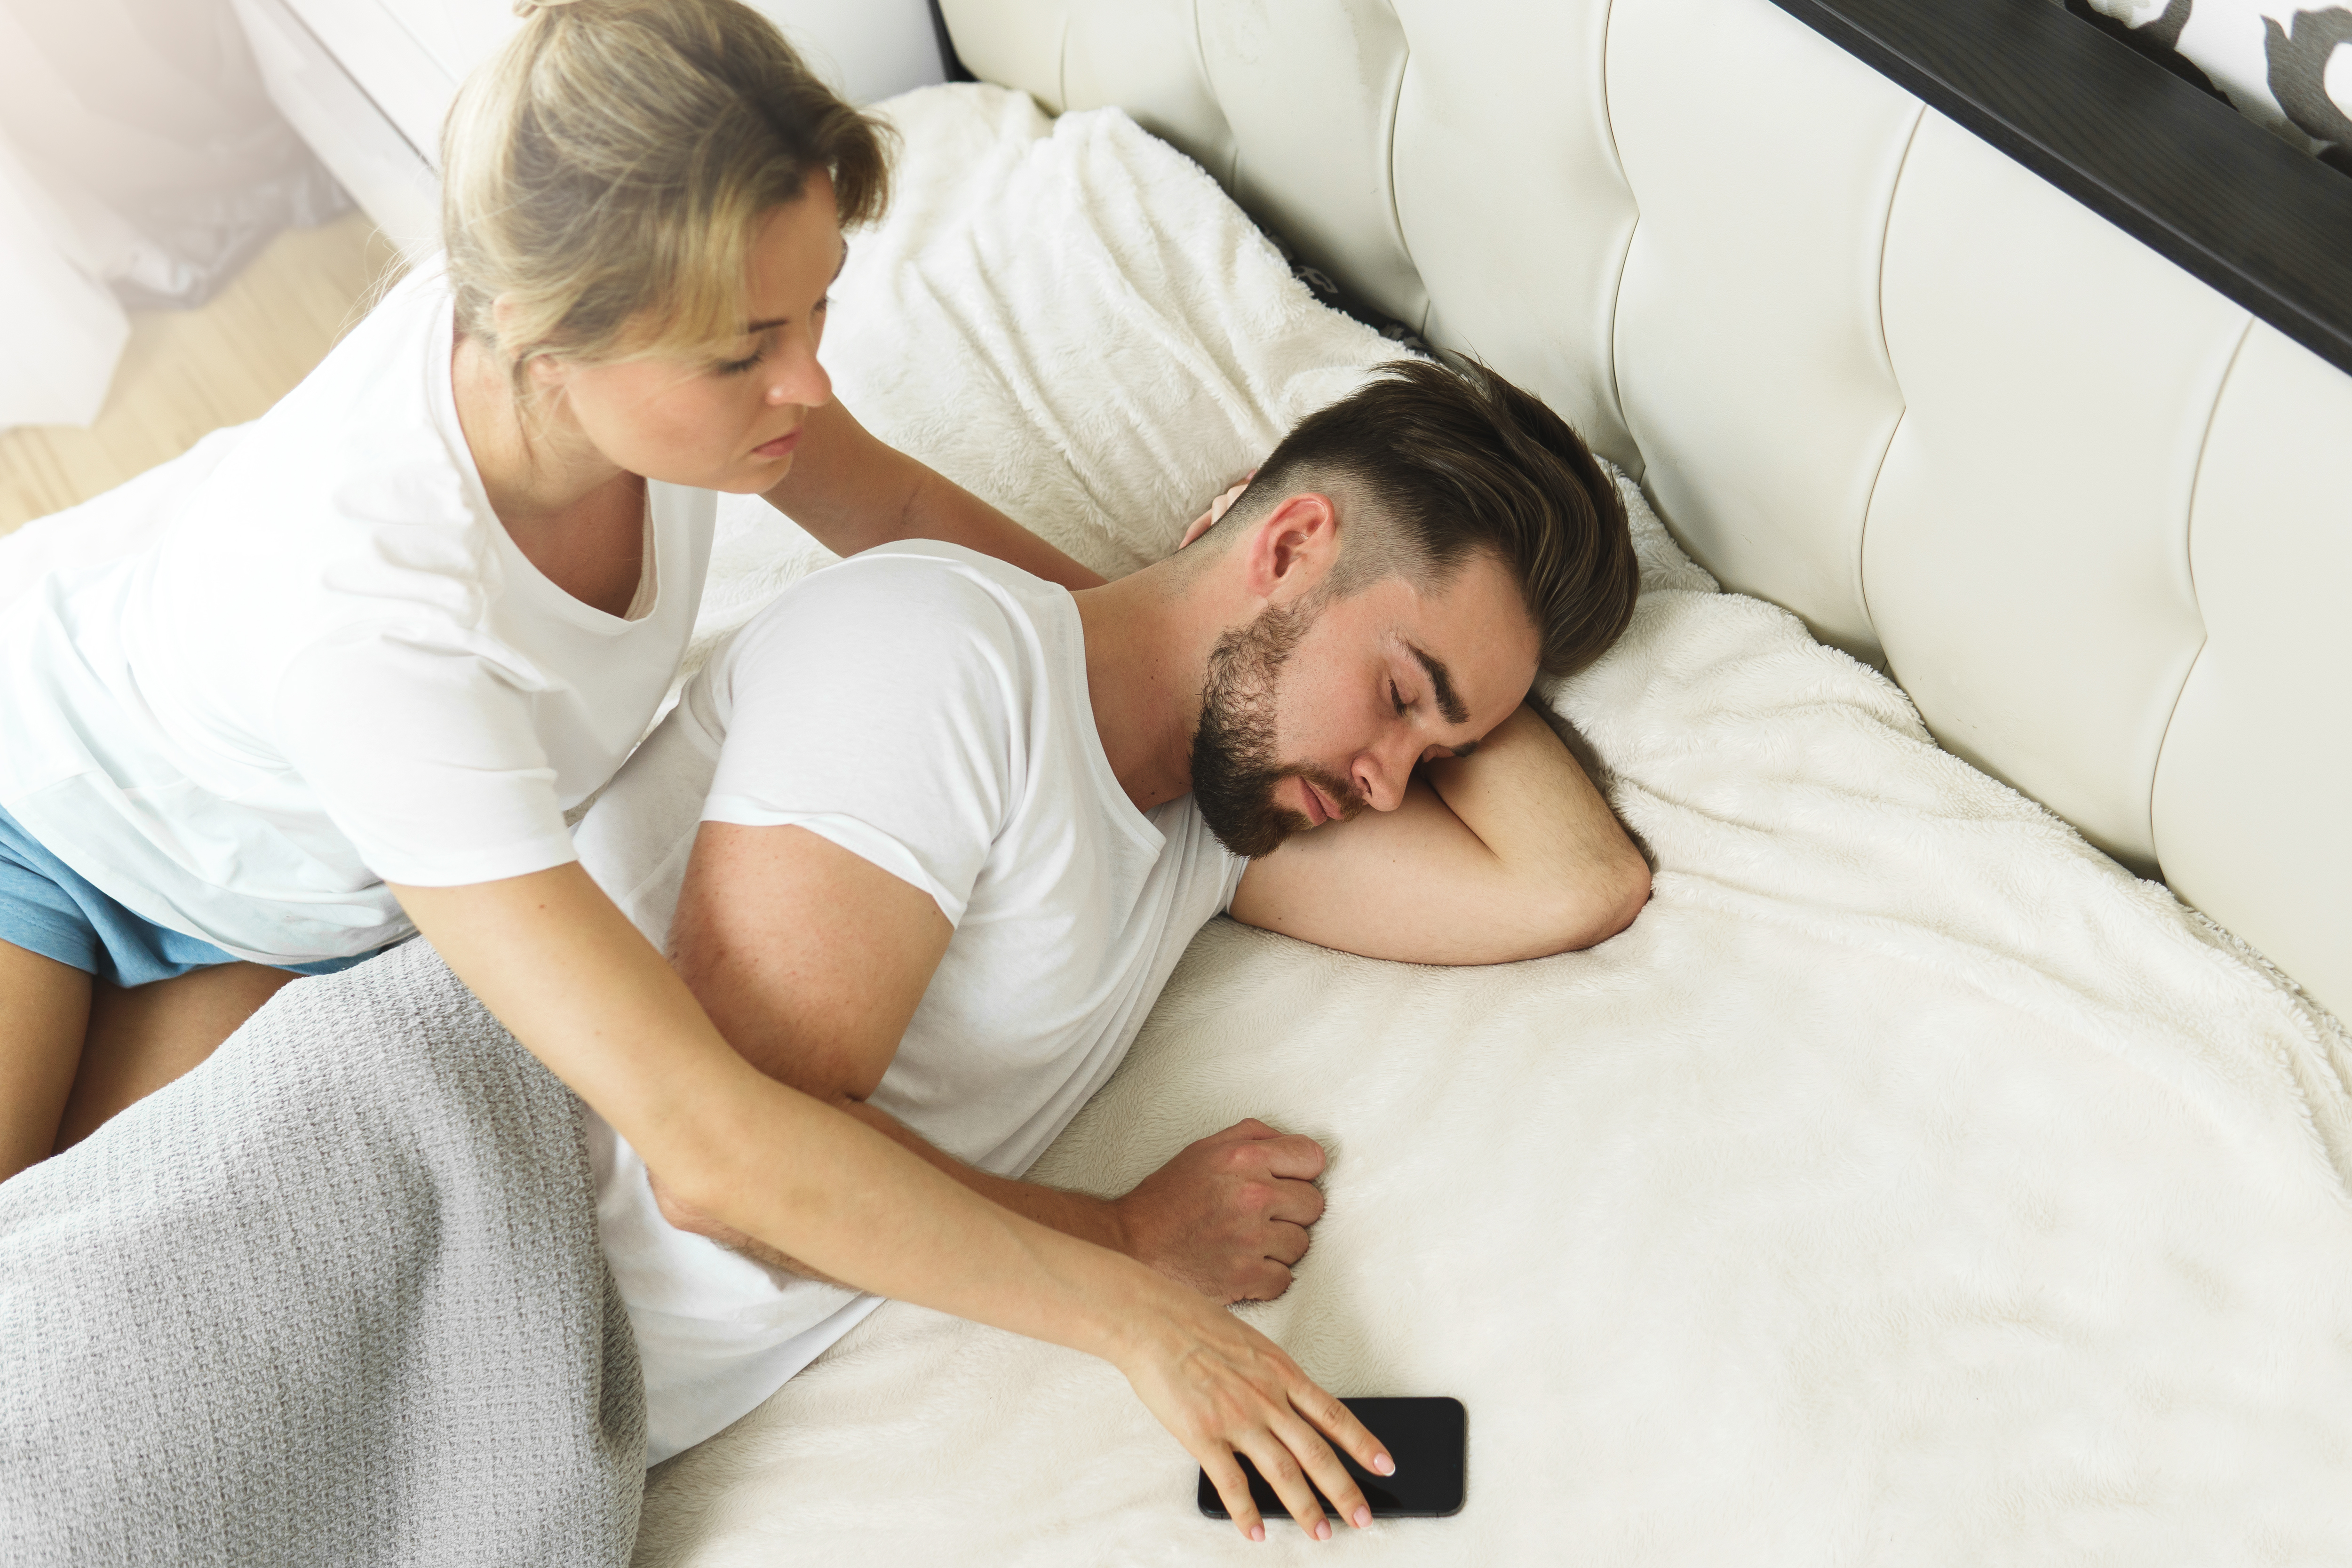 A woman trying to take her partner's phone while he sleeps | Source: Shutterstock